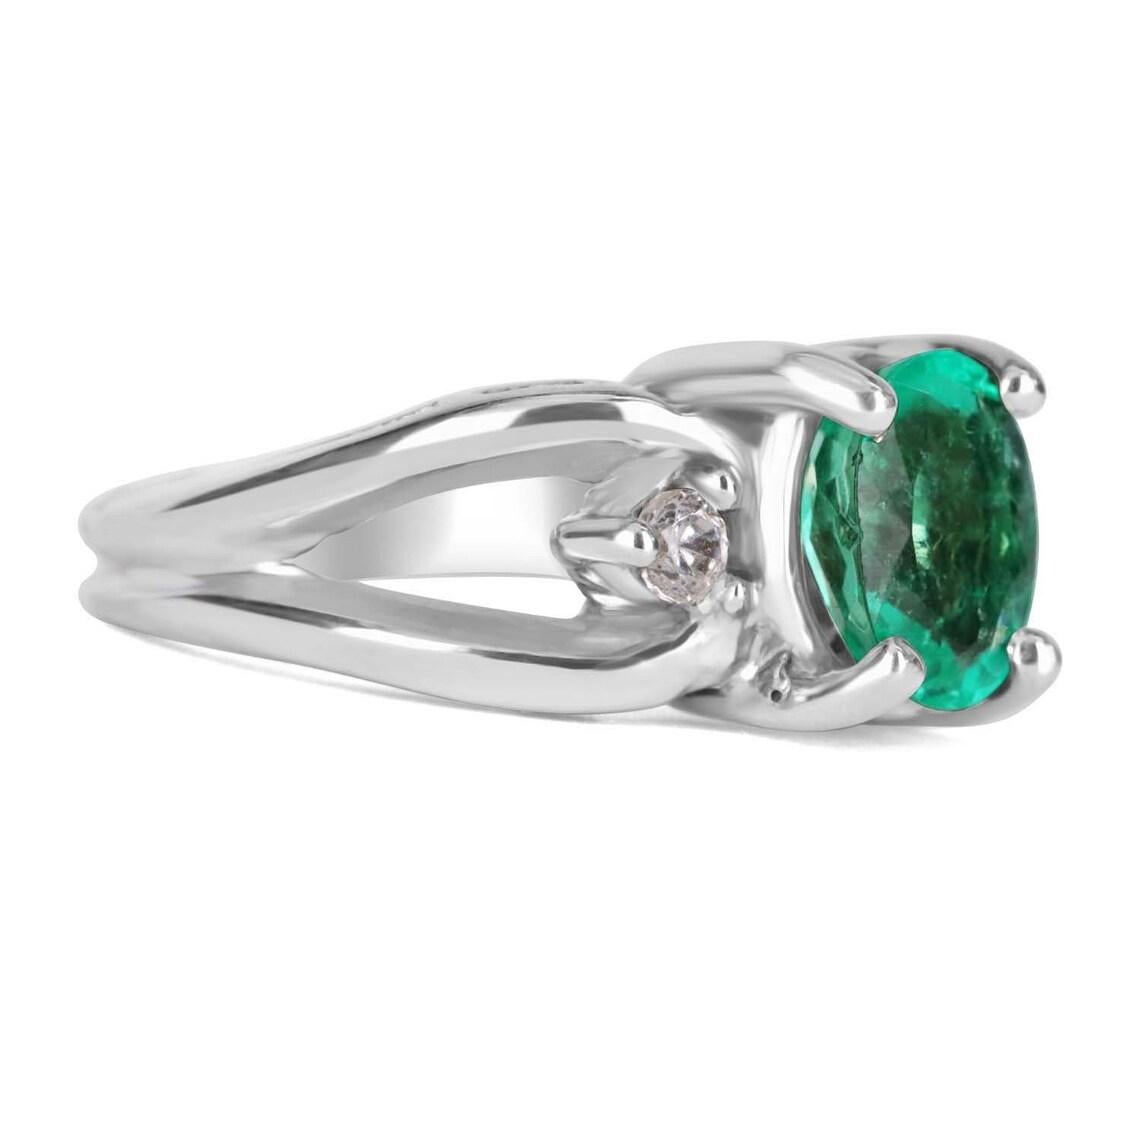 Displayed is a Colombian emerald and diamond ladies ring. Perfectly handcrafted in solid 14K white gold, this opulent ring features a bright, green Colombian emerald oval that is set in a secure four prong setting. On either side of the center stone